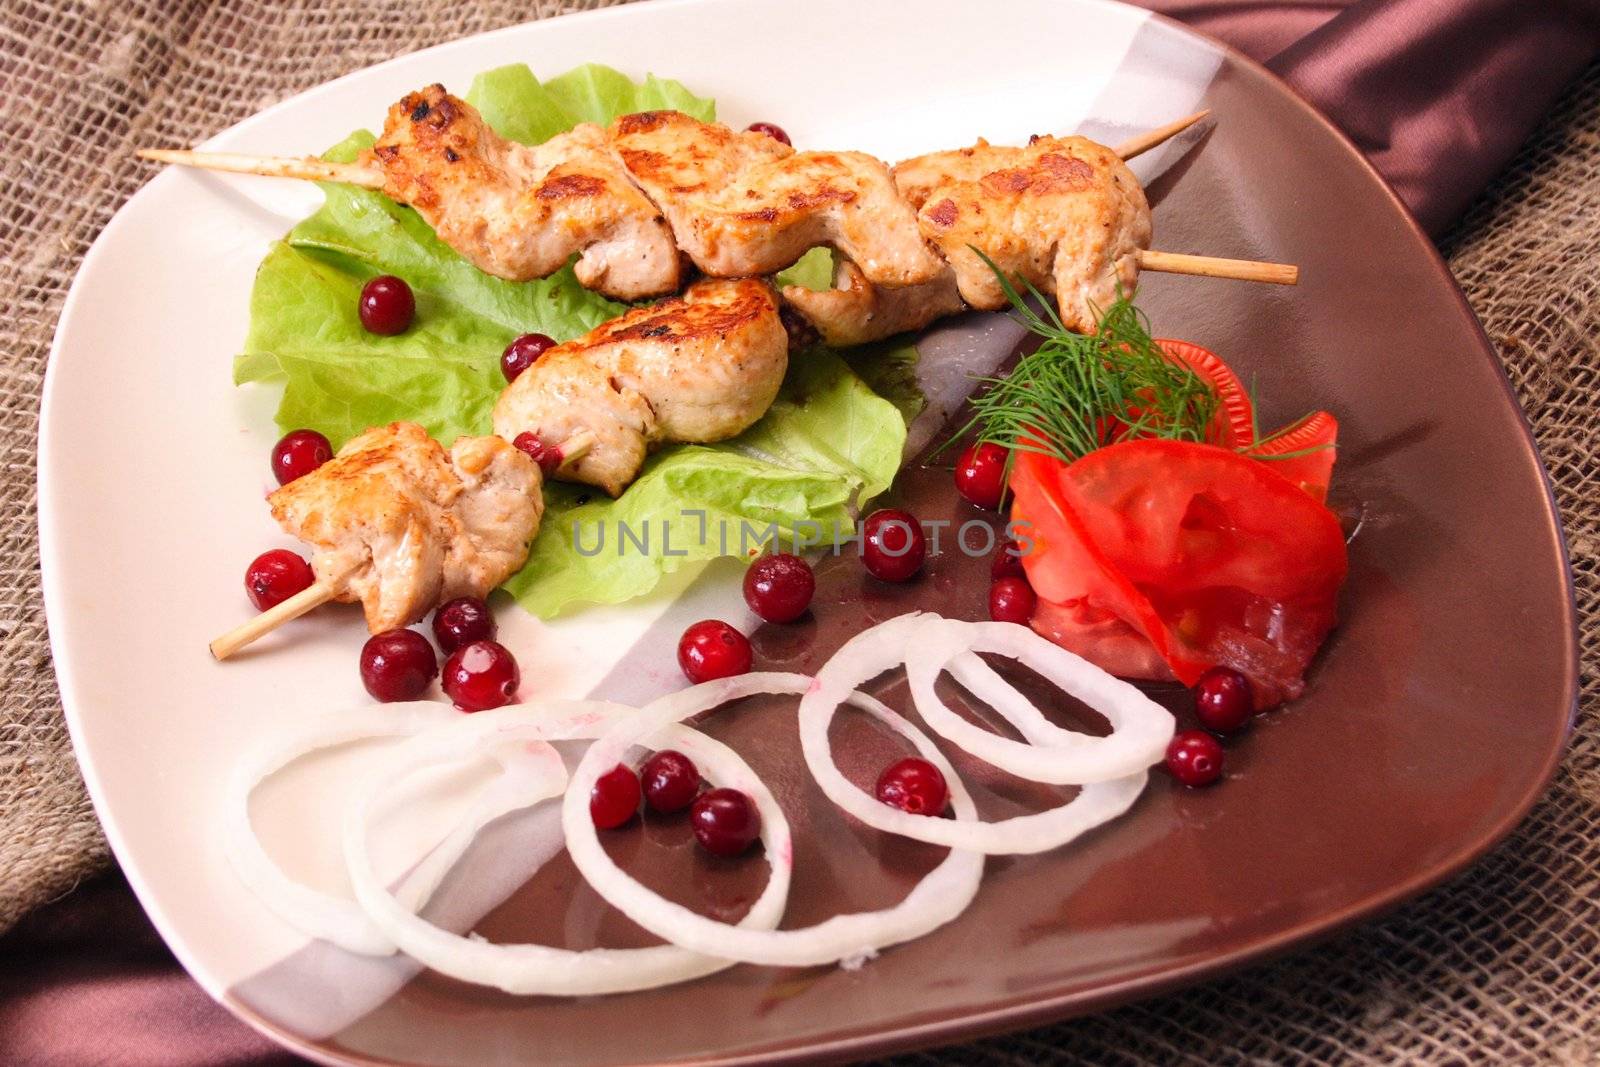 Meat dish, grill skewer